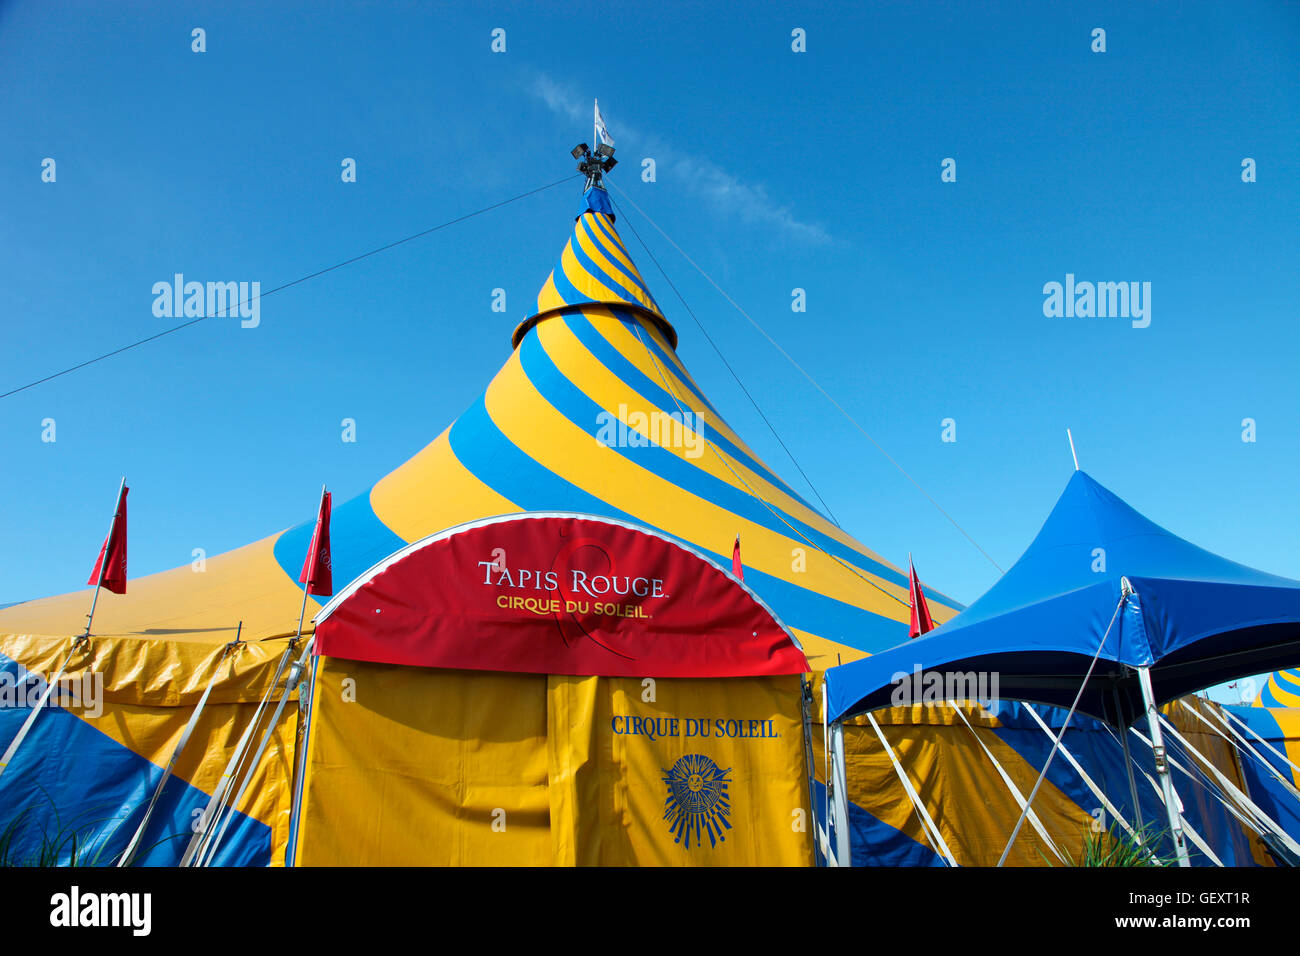 Cirque du Soleil Tapis Rouge tent in Montreal. Stock Photo